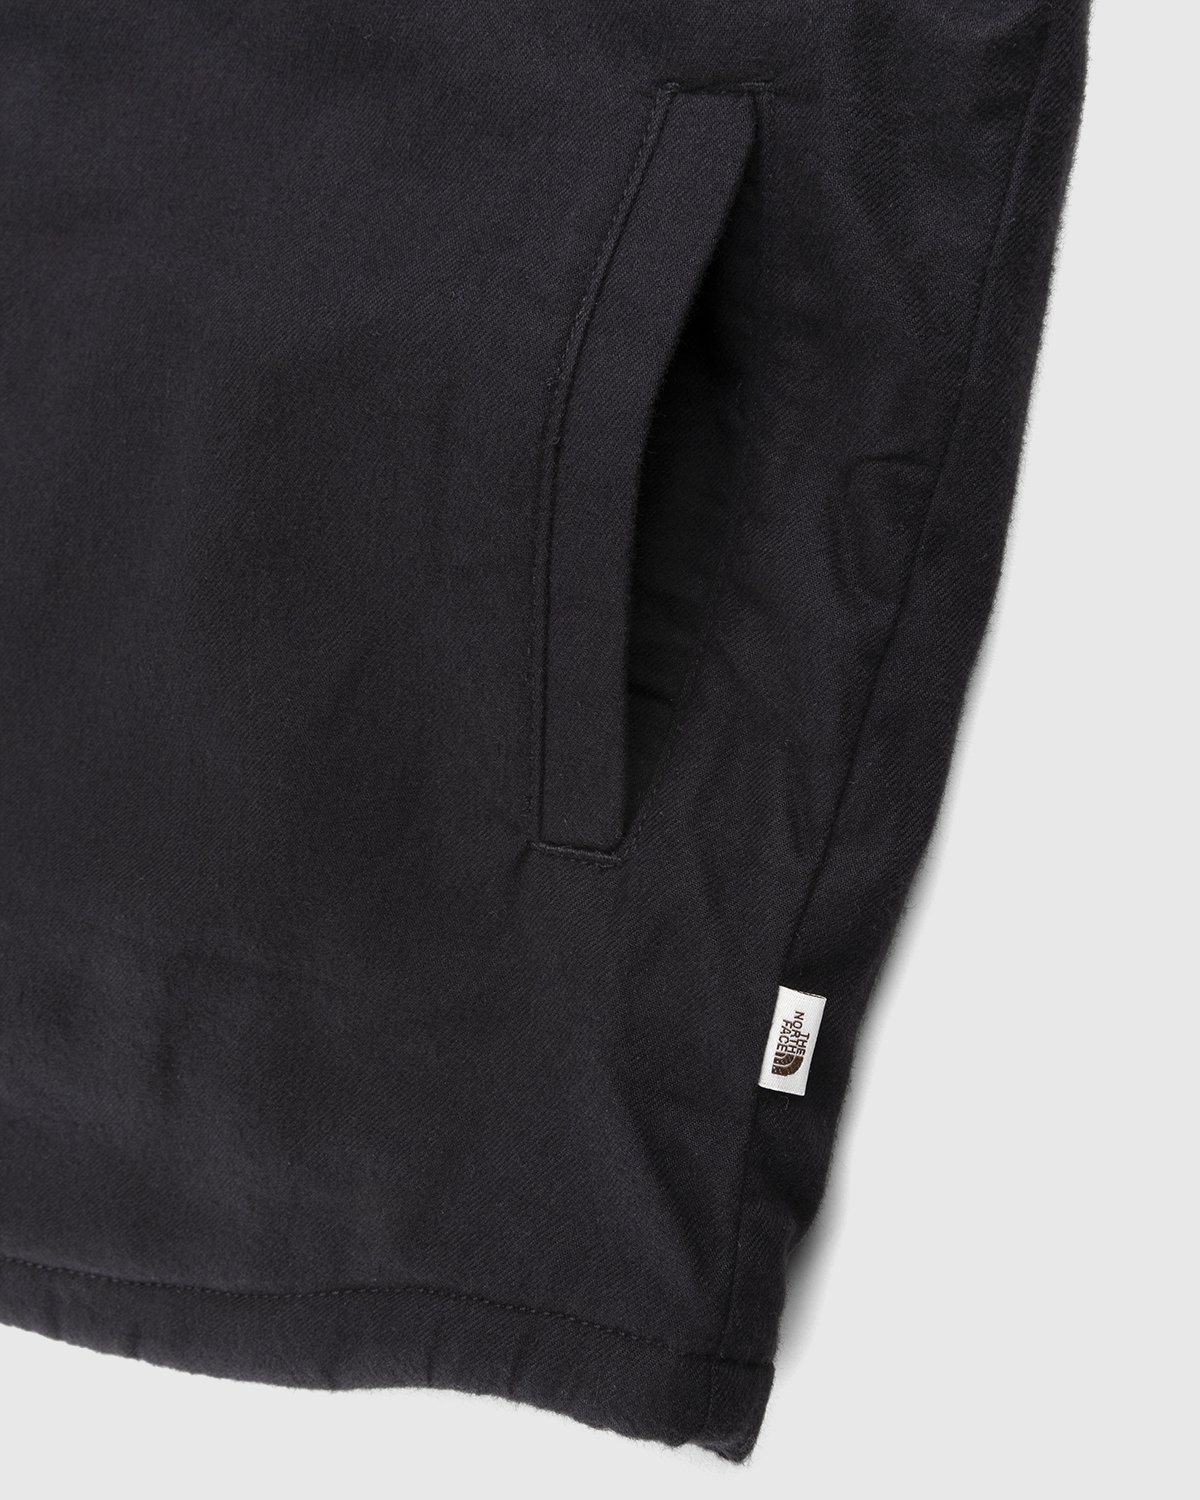 The North Face - Campshire Shirt Black - Clothing - Black - Image 6